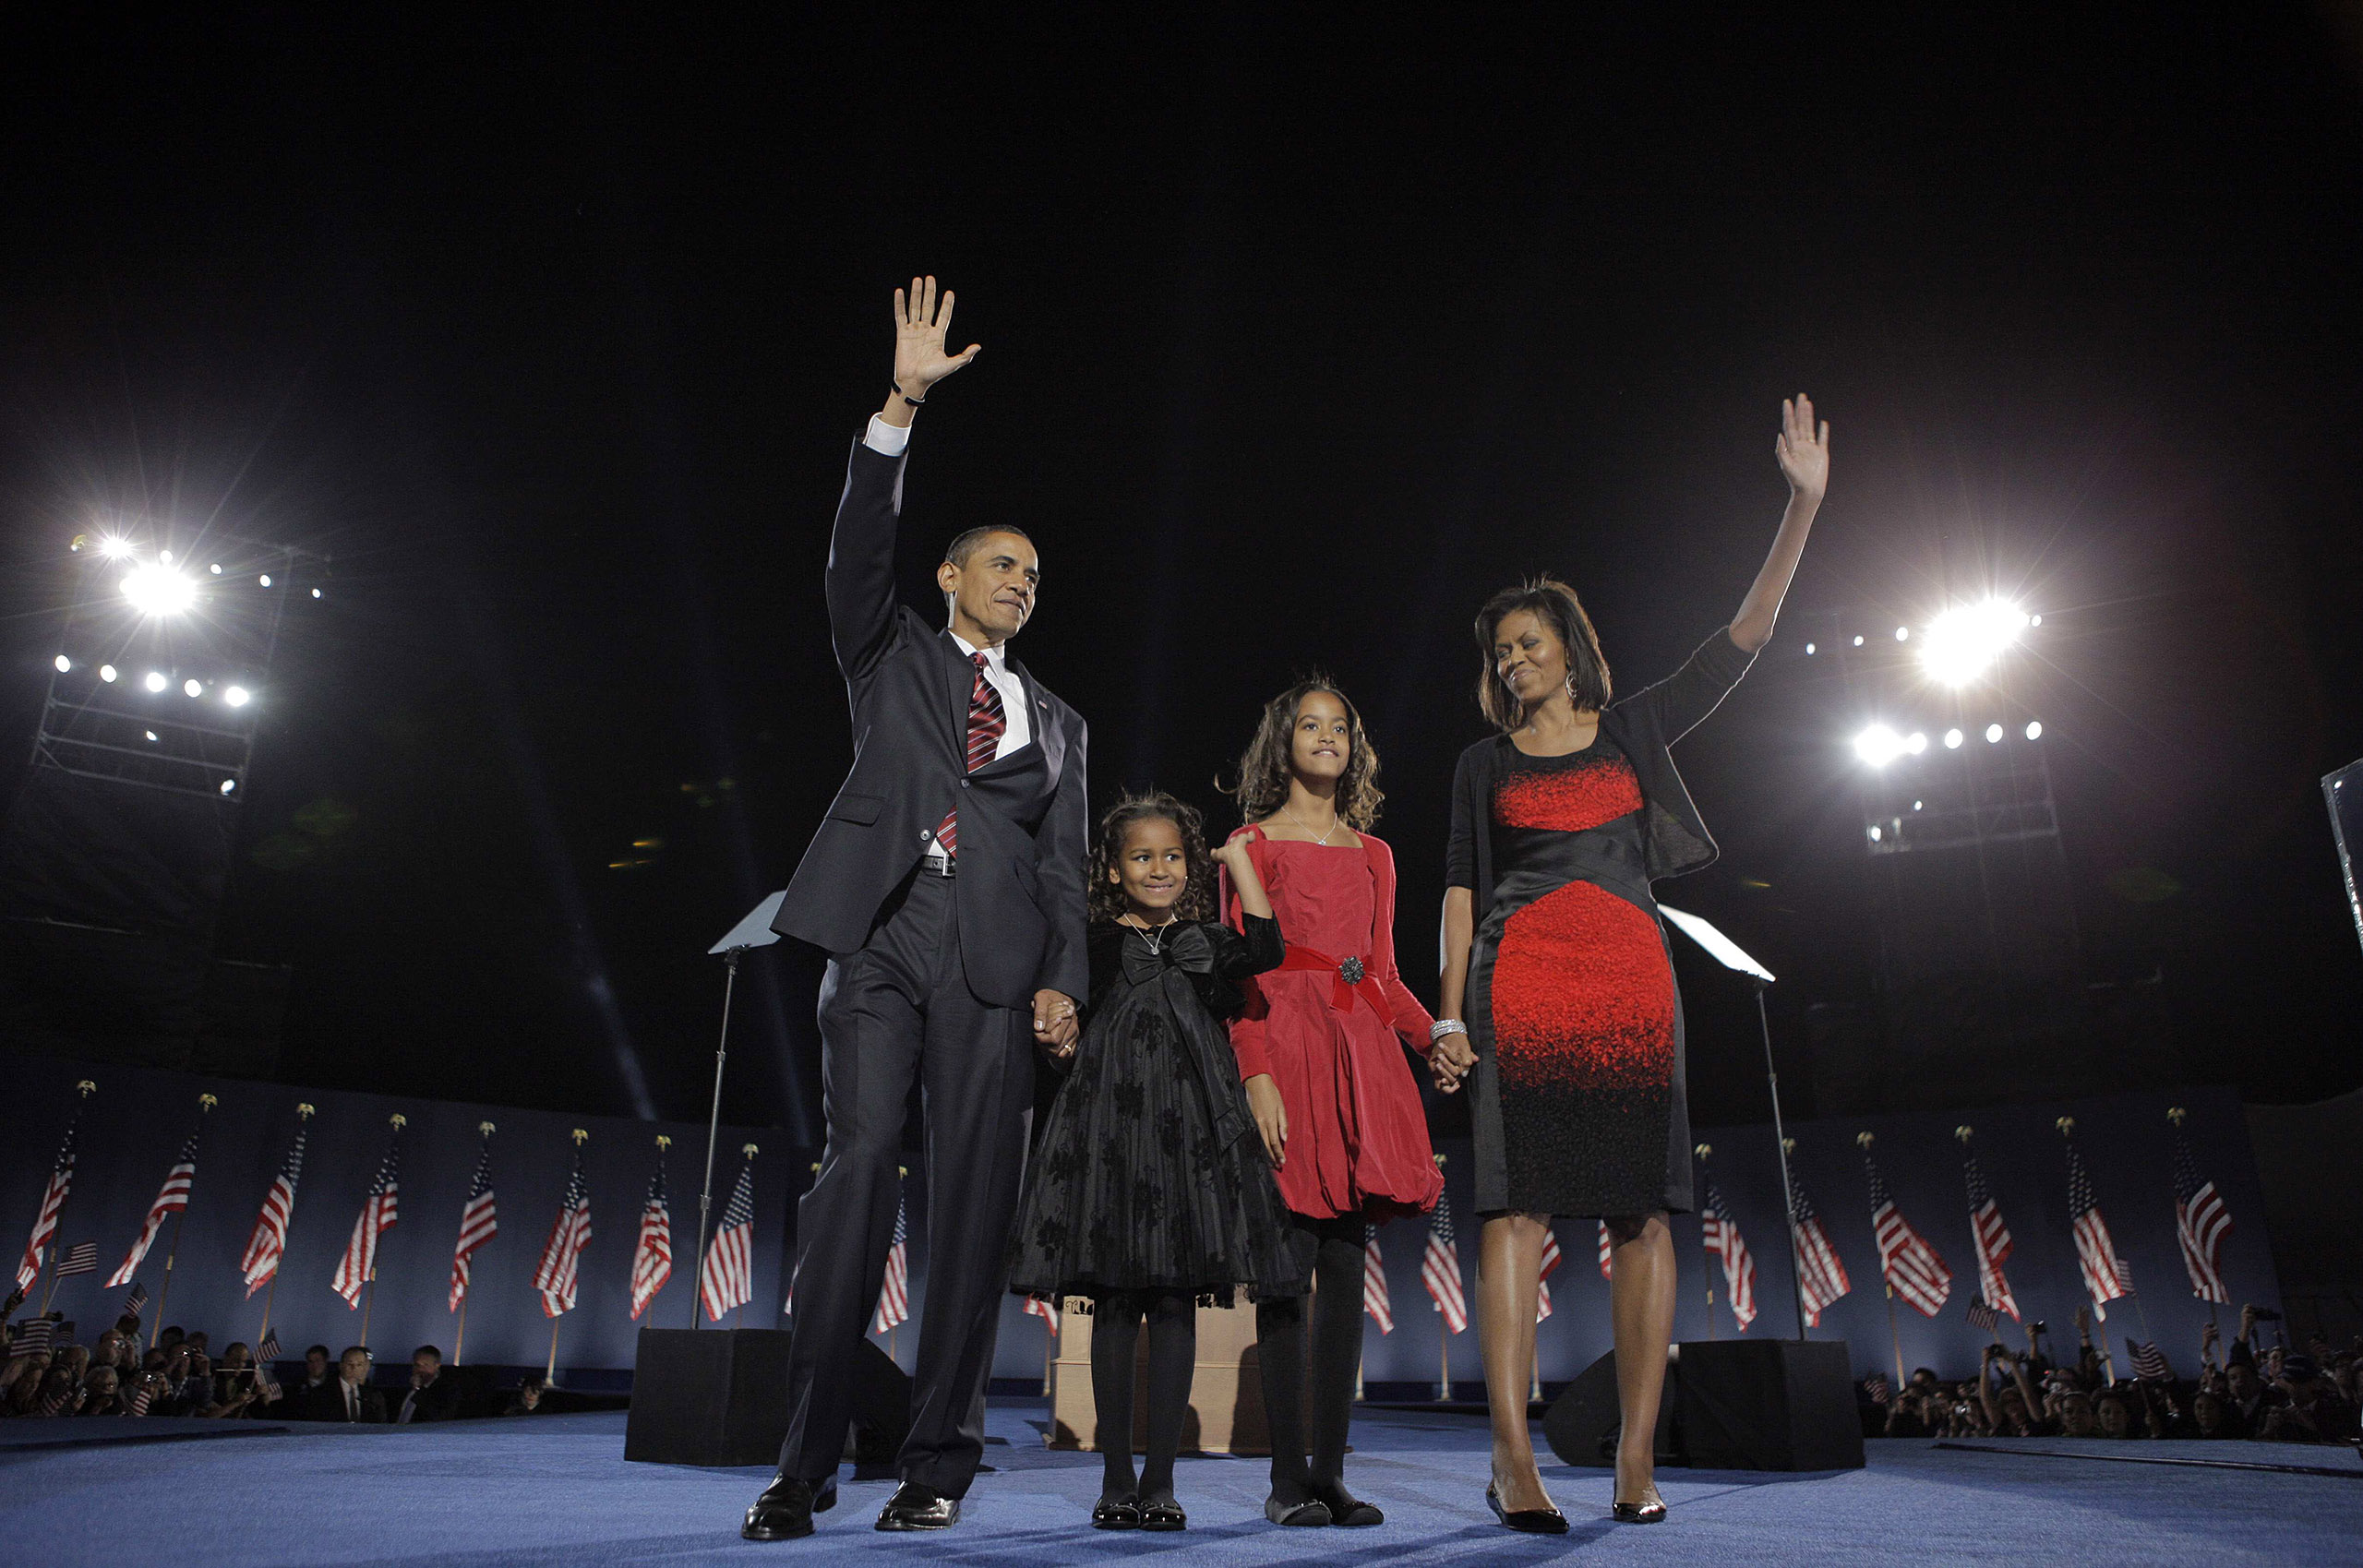 Barack Obama: The Obamas' children, from left, Sasha, 7, and Malia, 10, are the youngest children to live in the White House since the Kennedy administration. Sasha now attends the Sidwell Friends School. Malia graduated from high school in 2016 and is taking a gap year before attending Harvard.